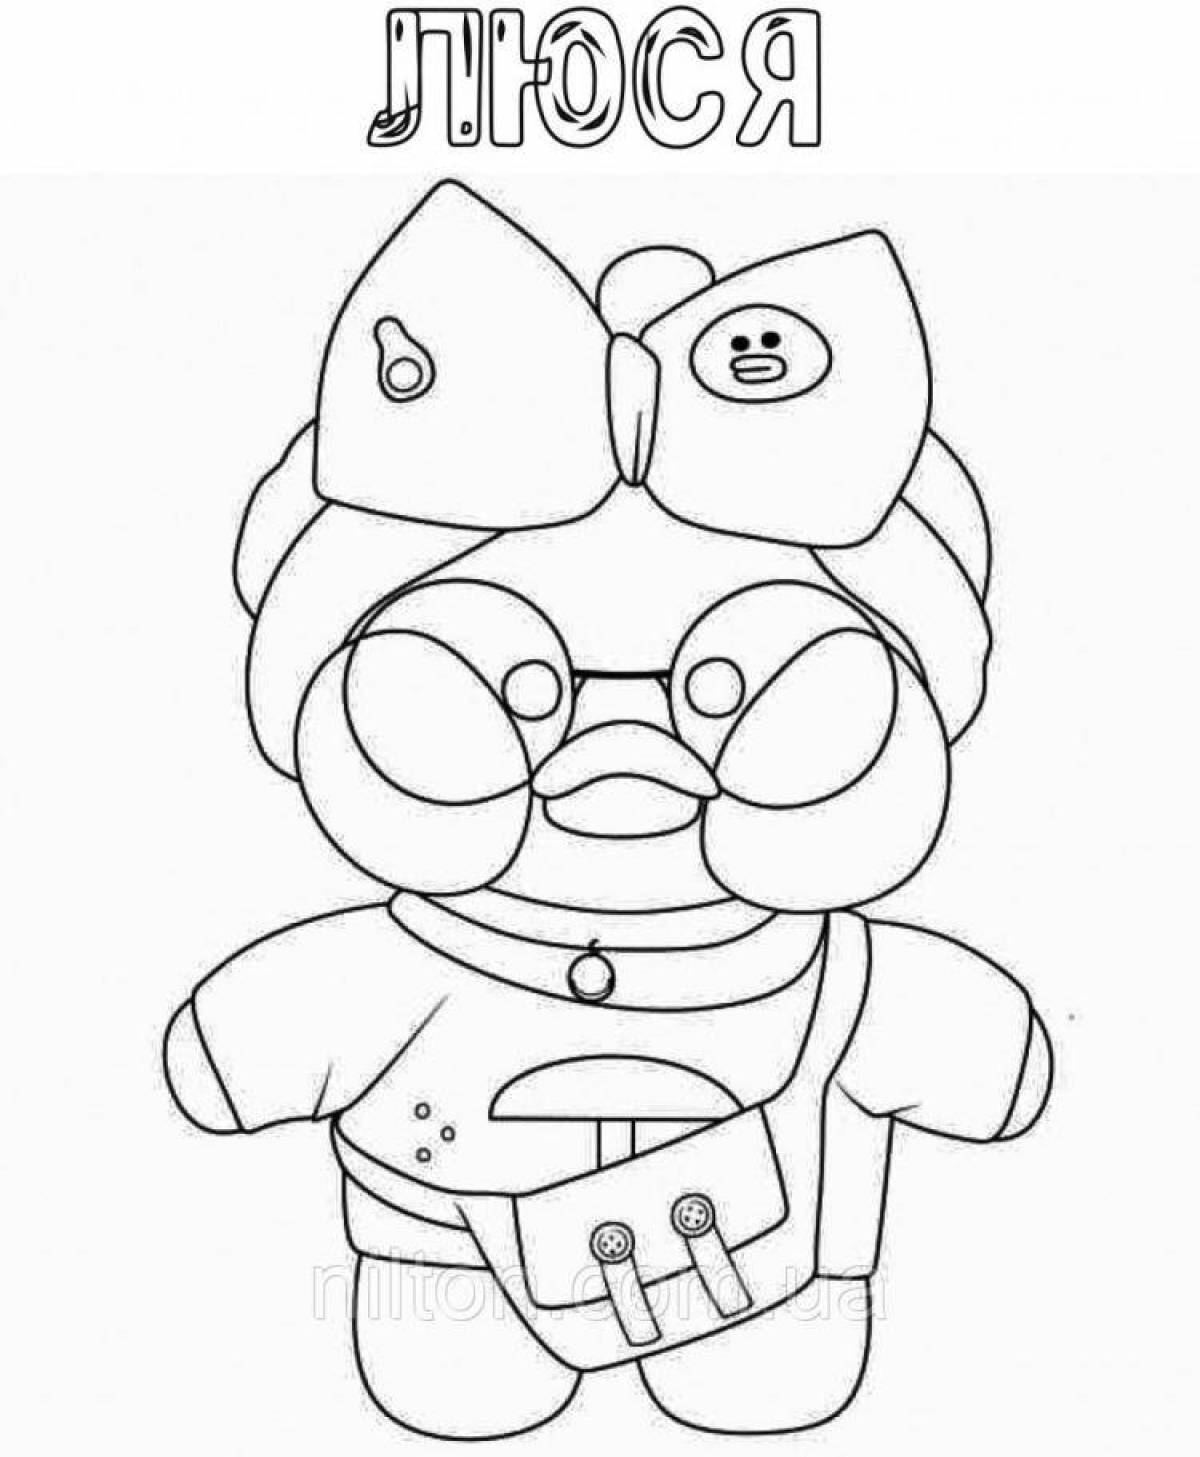 Exciting lalafan duck coloring page